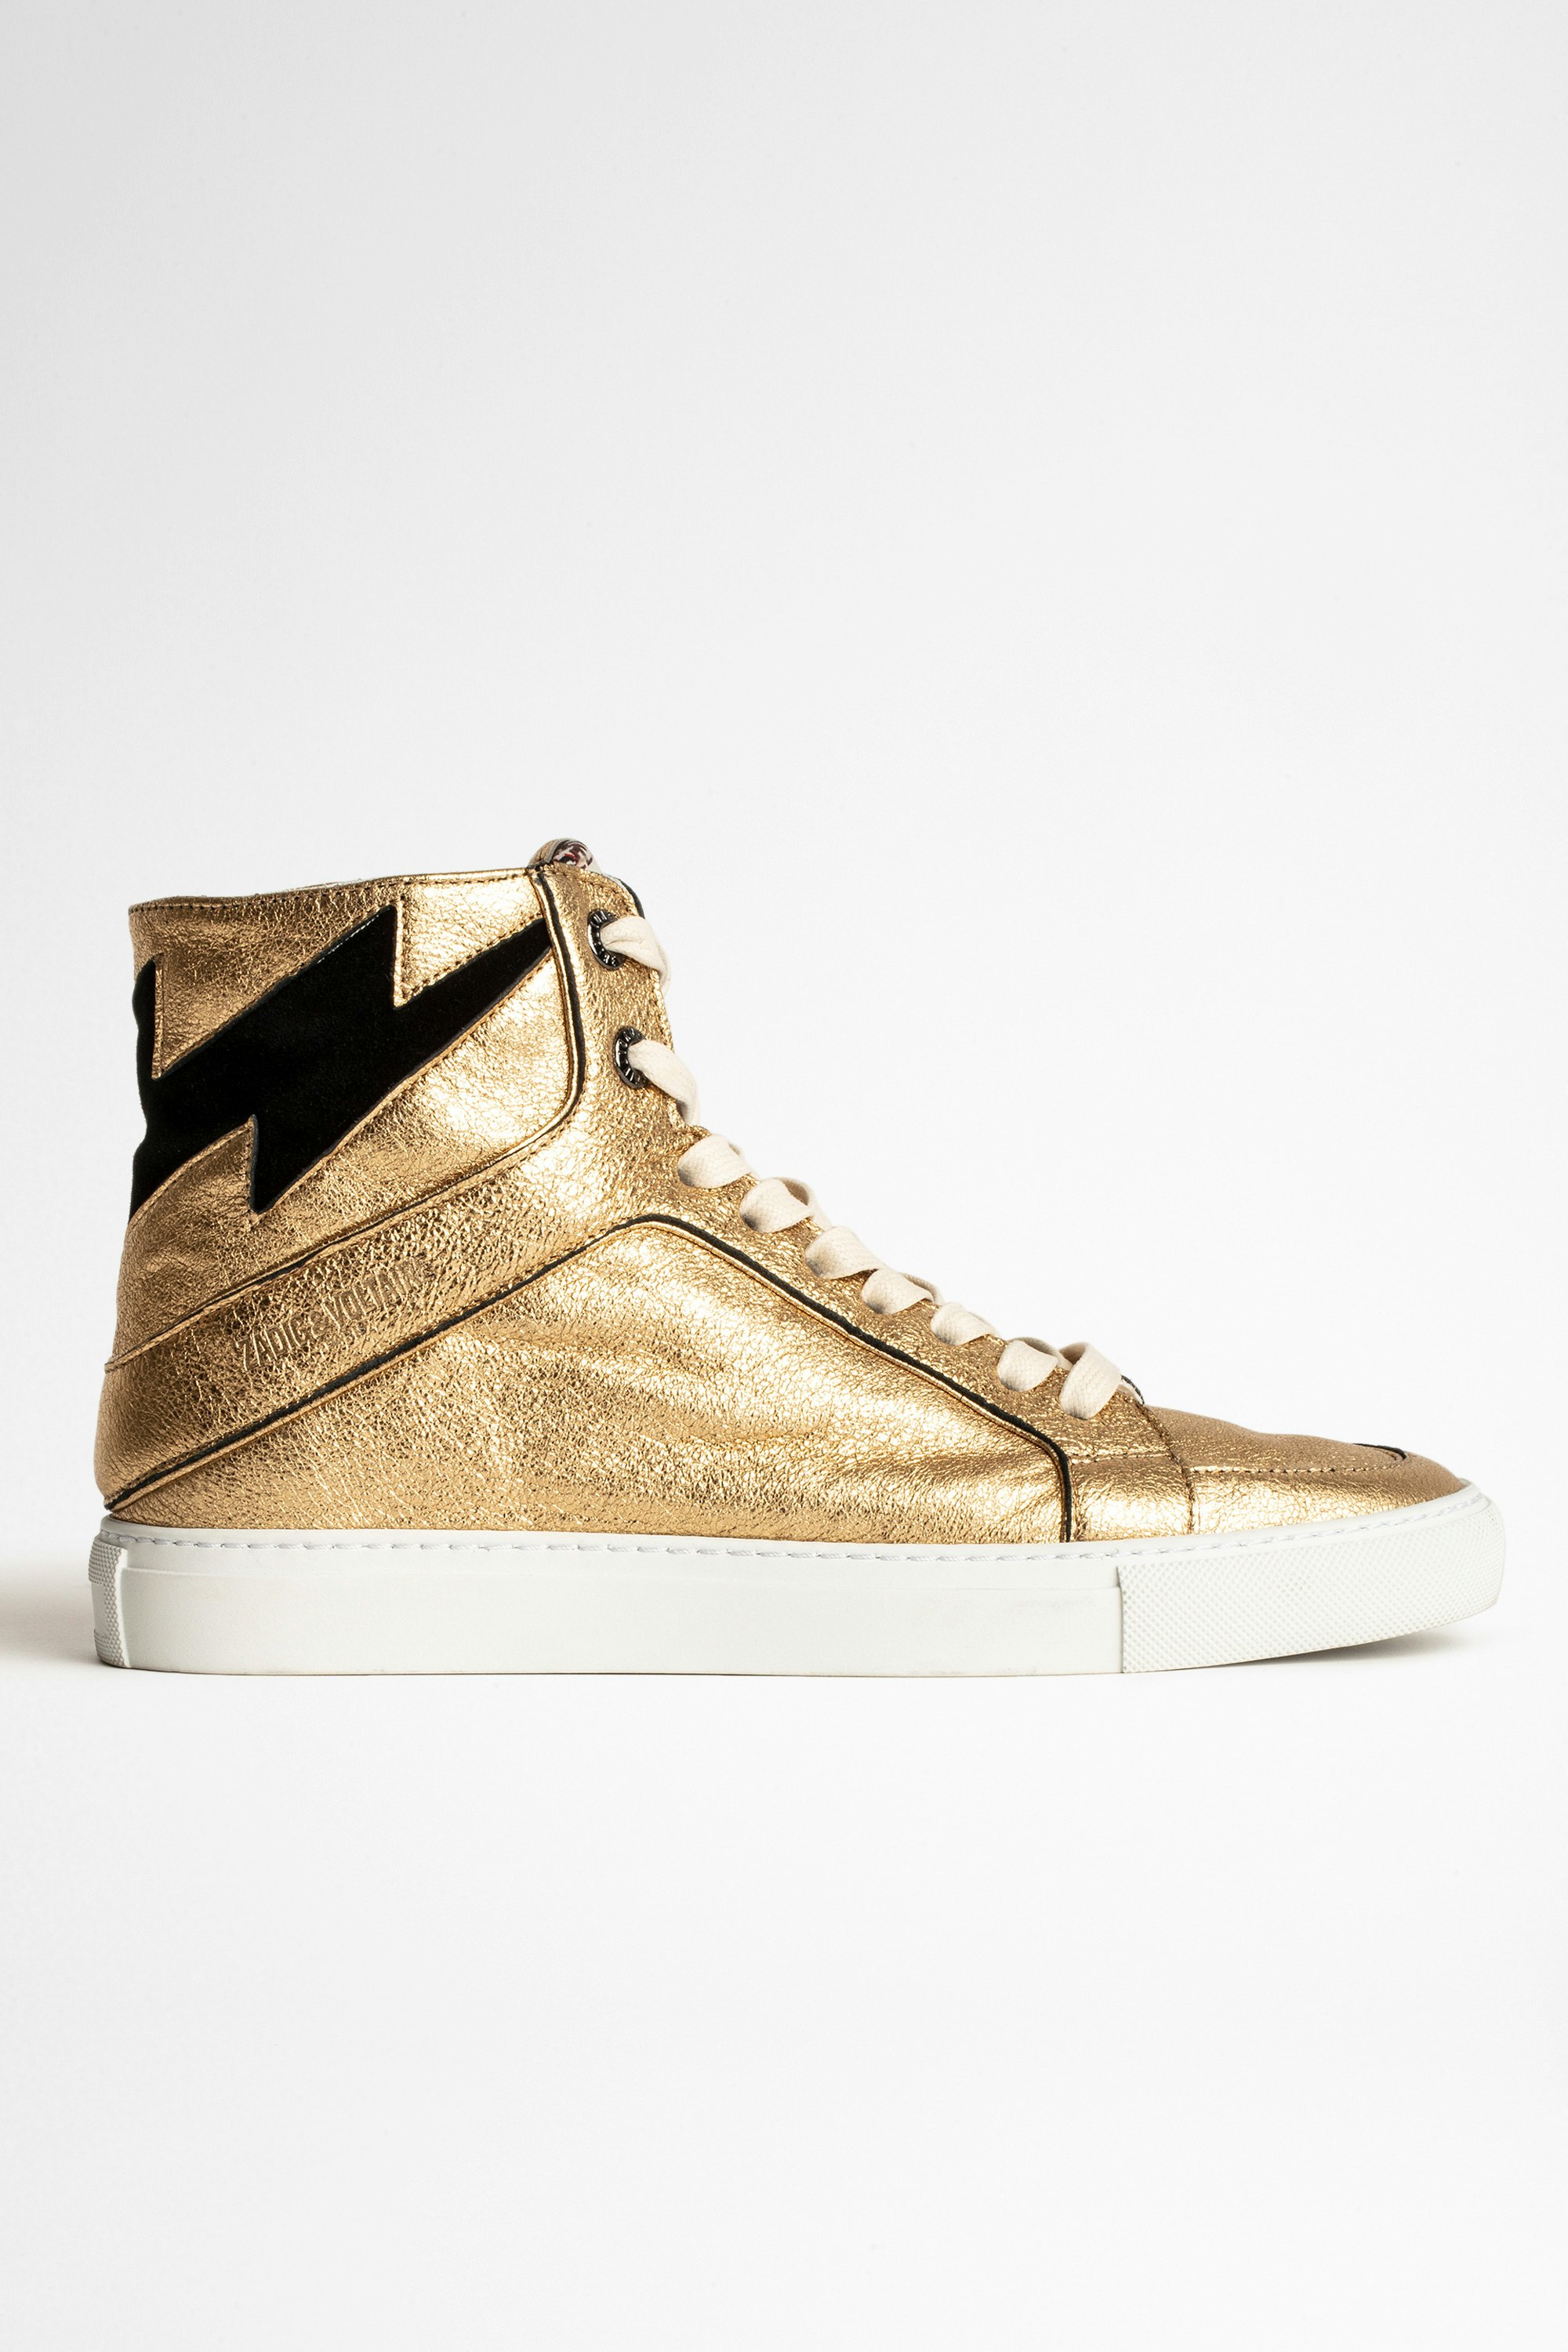 ZV1747 High Flash Metal Sneakers Leather Women’s gold metallic leather high-top sneakers